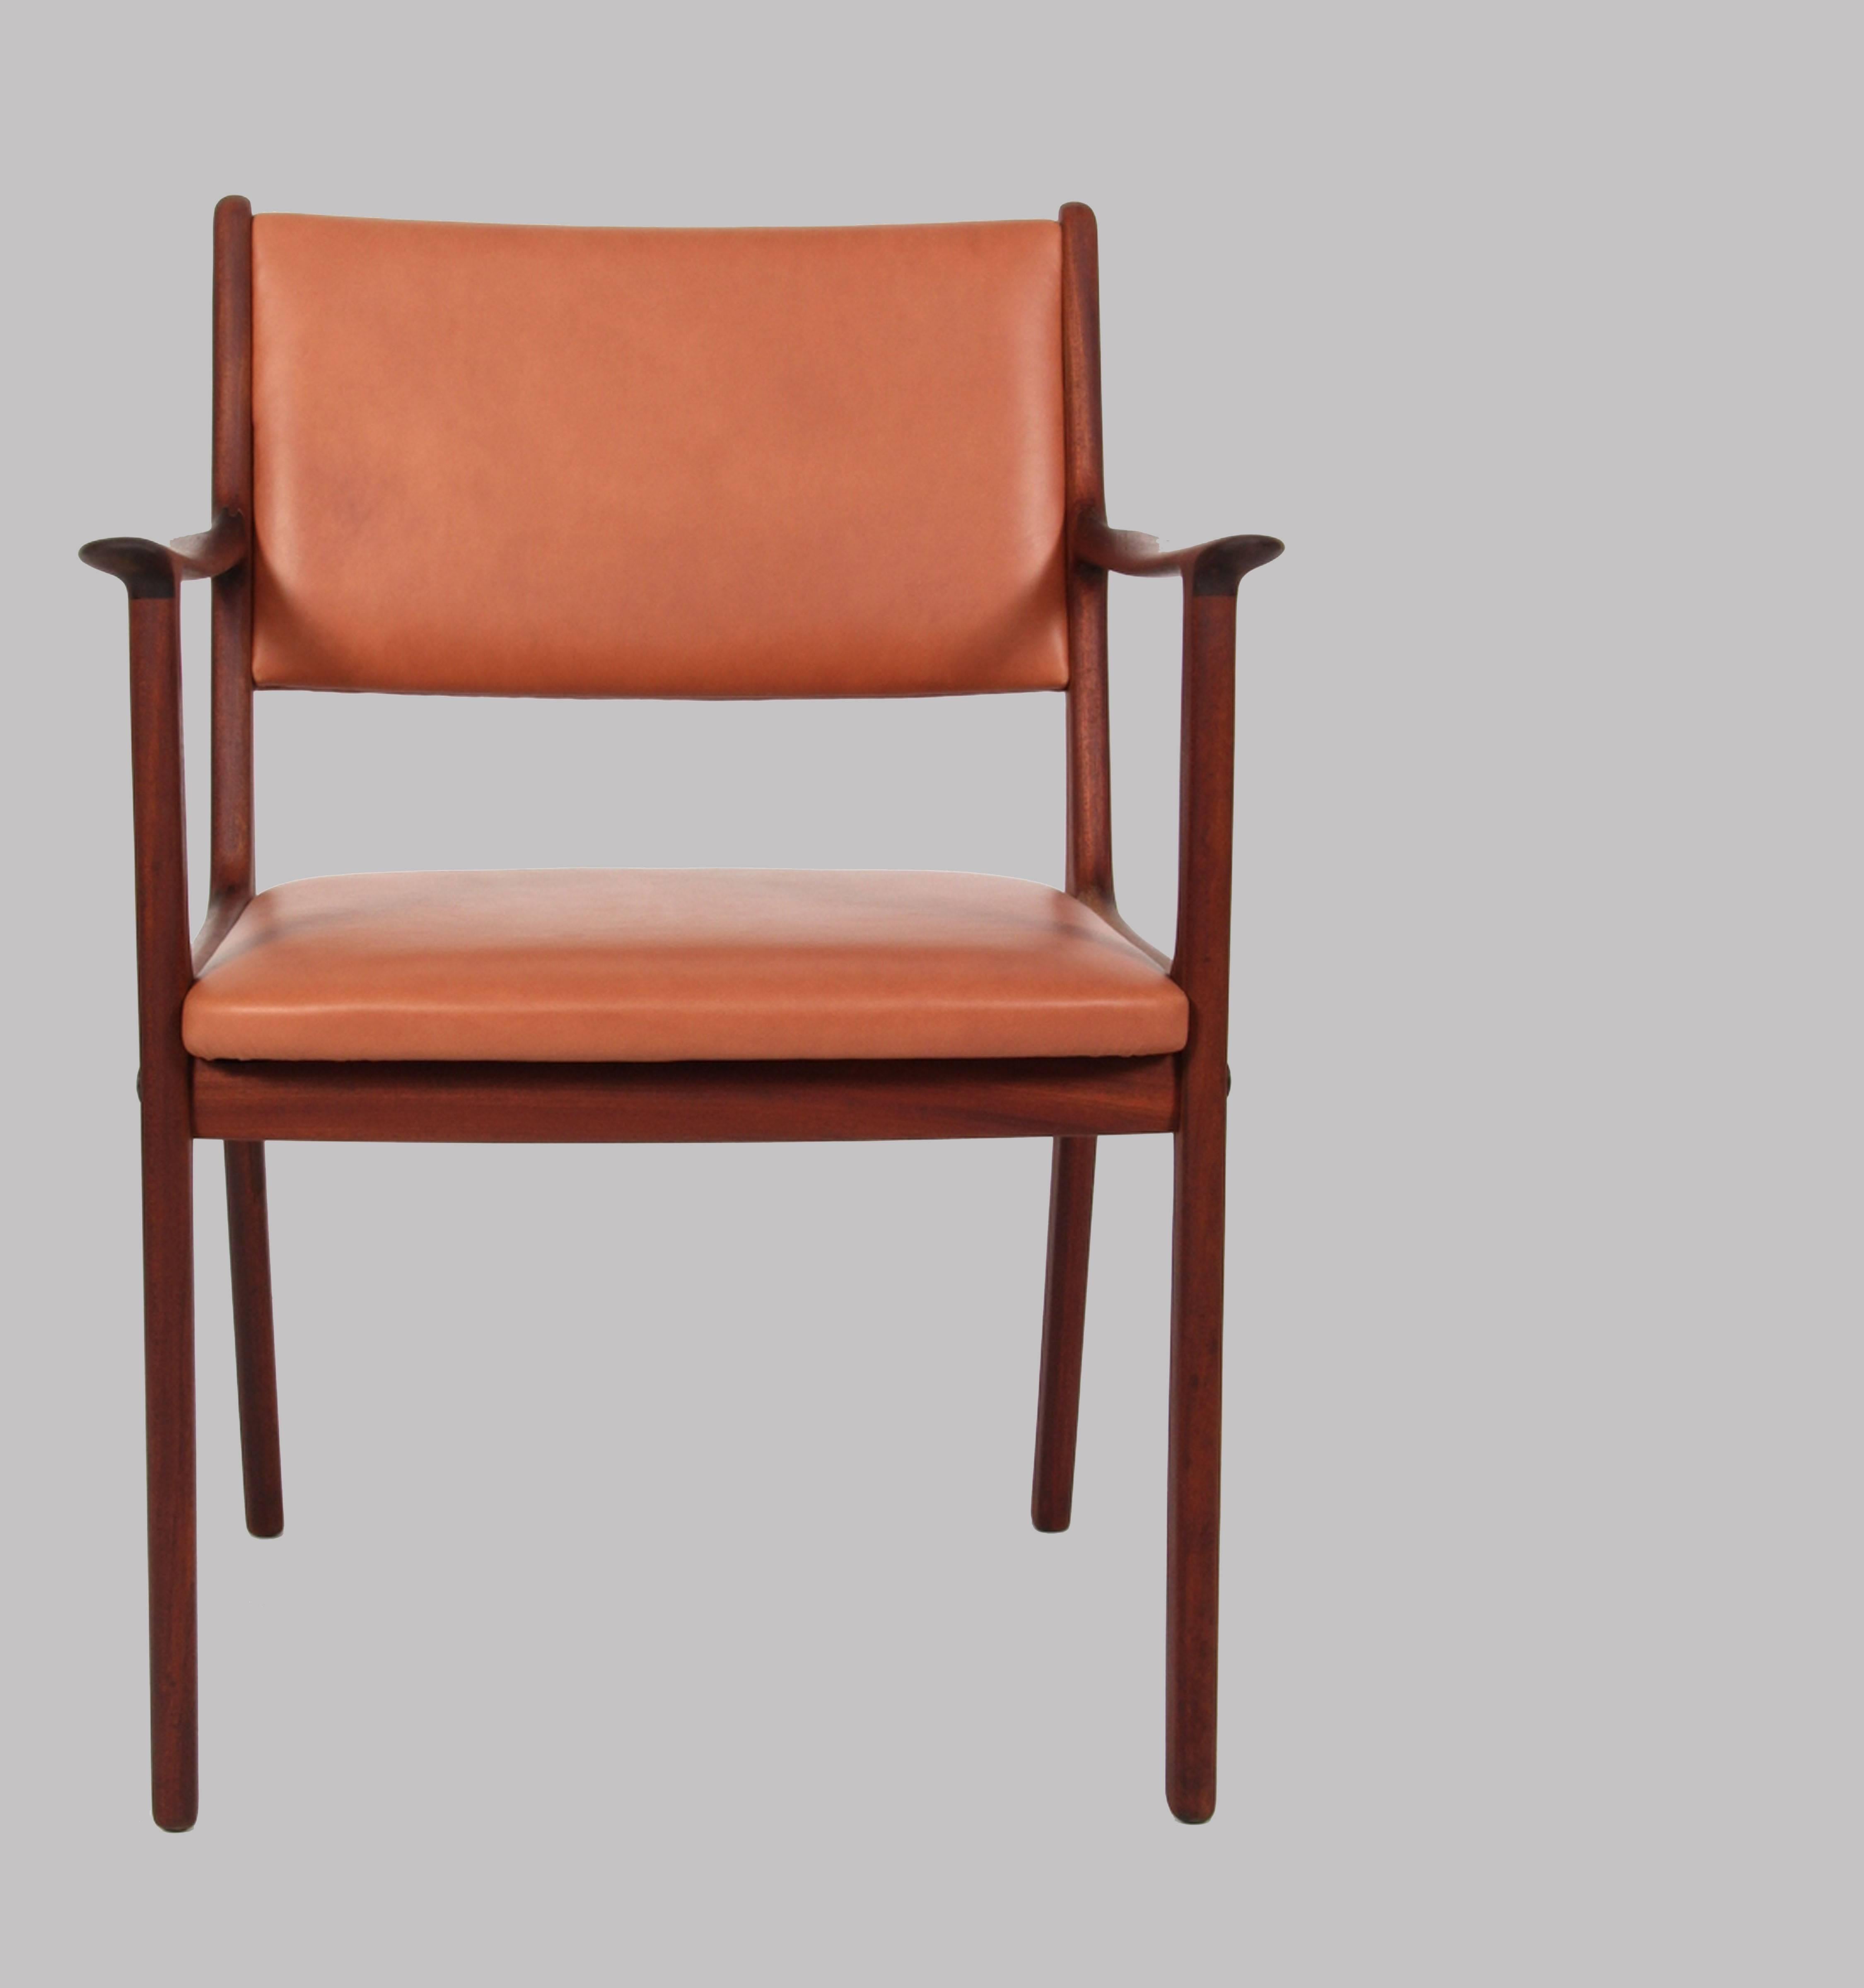 Set of five comfortable model PJ412 mahogany armchairs designed by Ole Wanscher for P.Jeppesens Møbelfabrik.

The chairs have been overlooked an refinished by our cabinetmaker and are in very good condition. The chairs have been reupholstered with